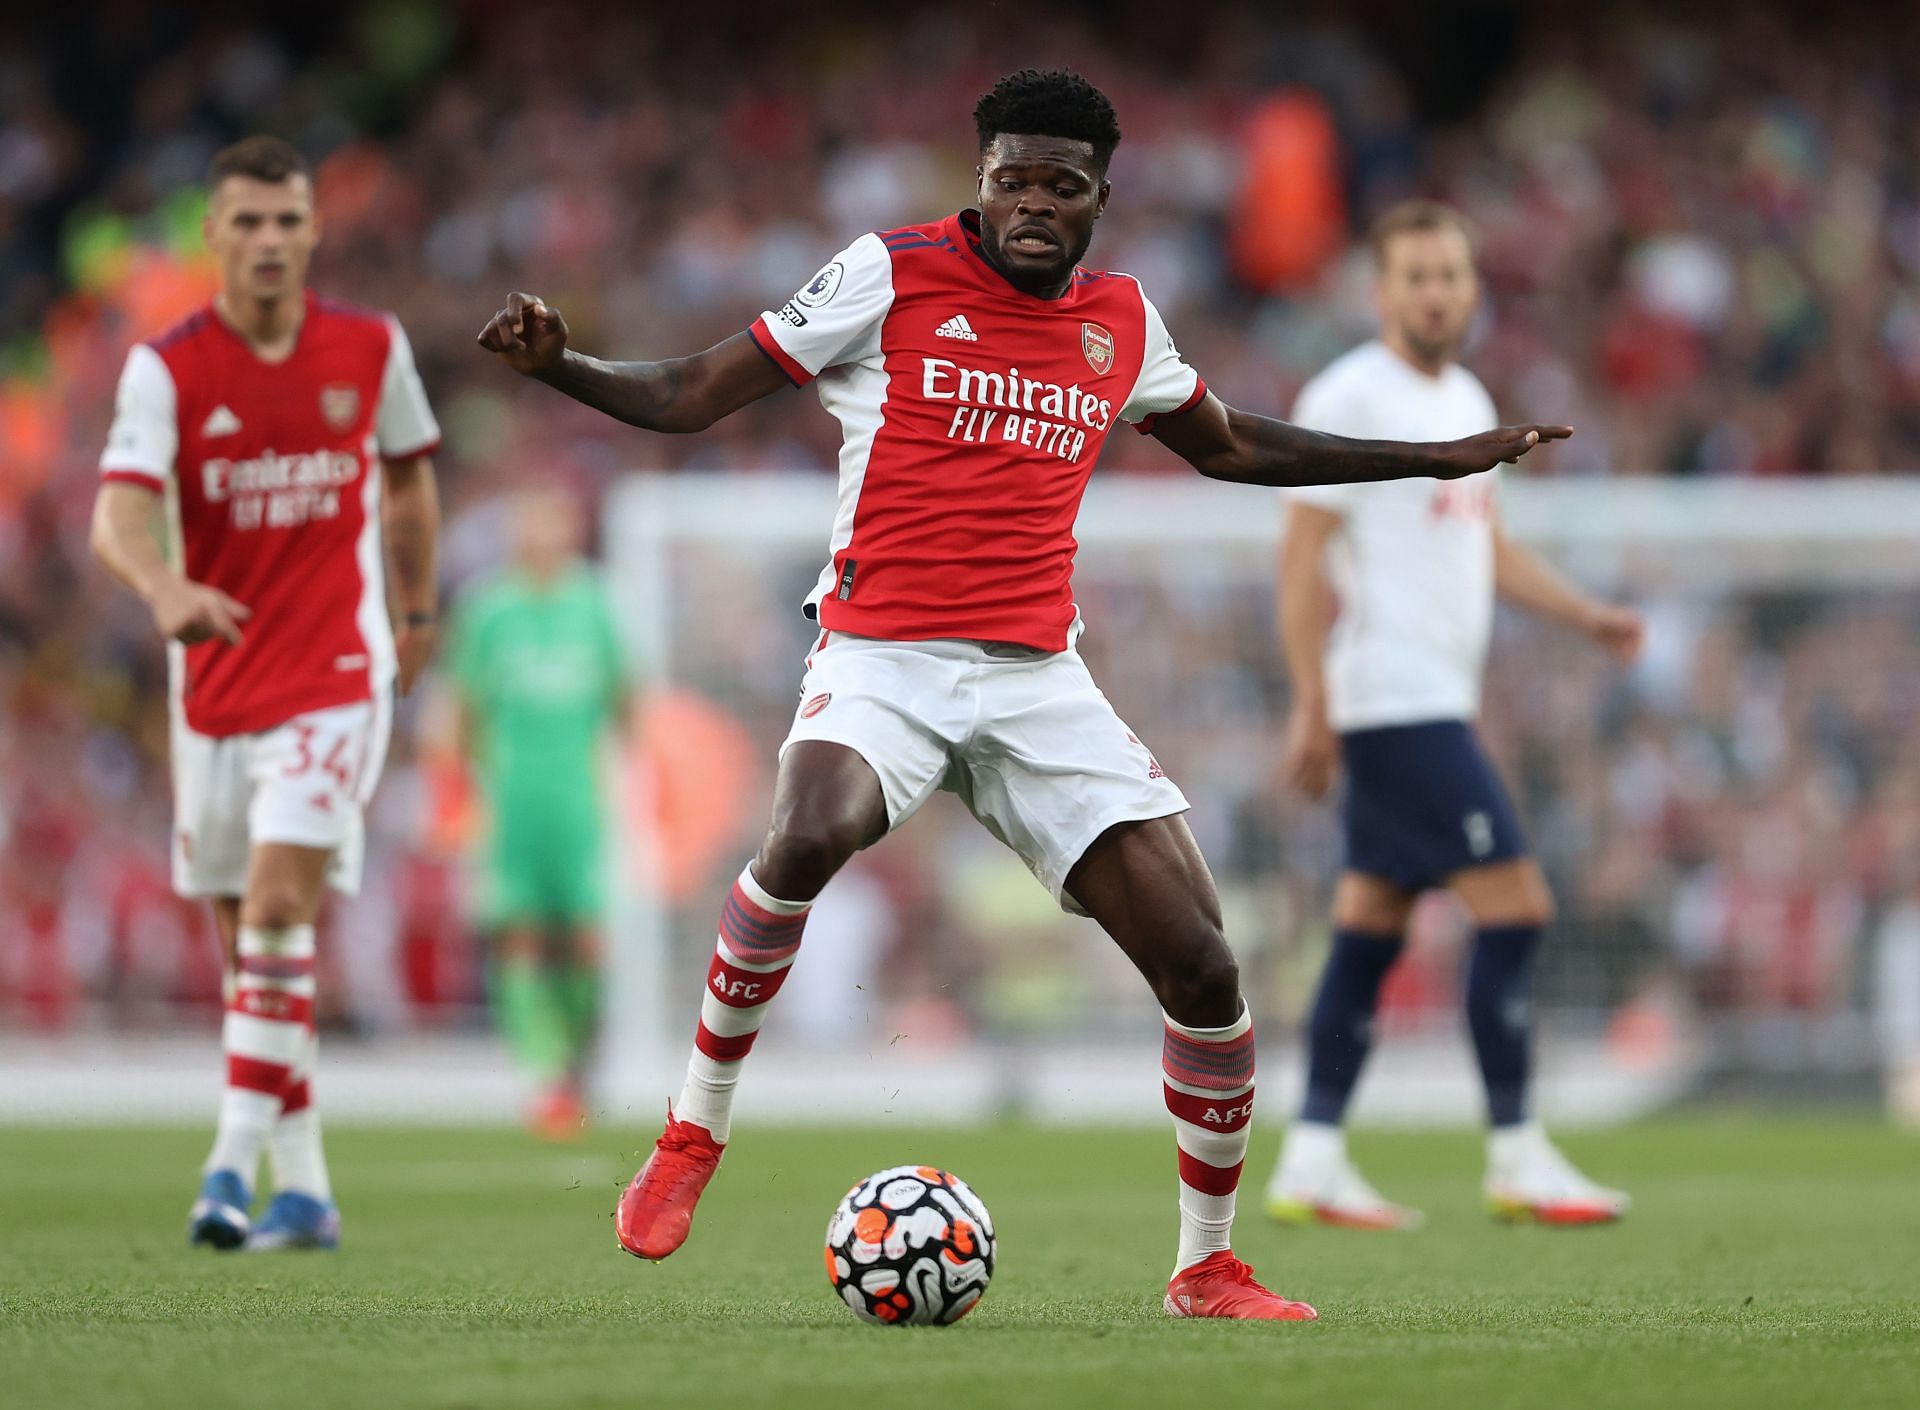 Thomas Partey has started 15 times in the Premier League this season